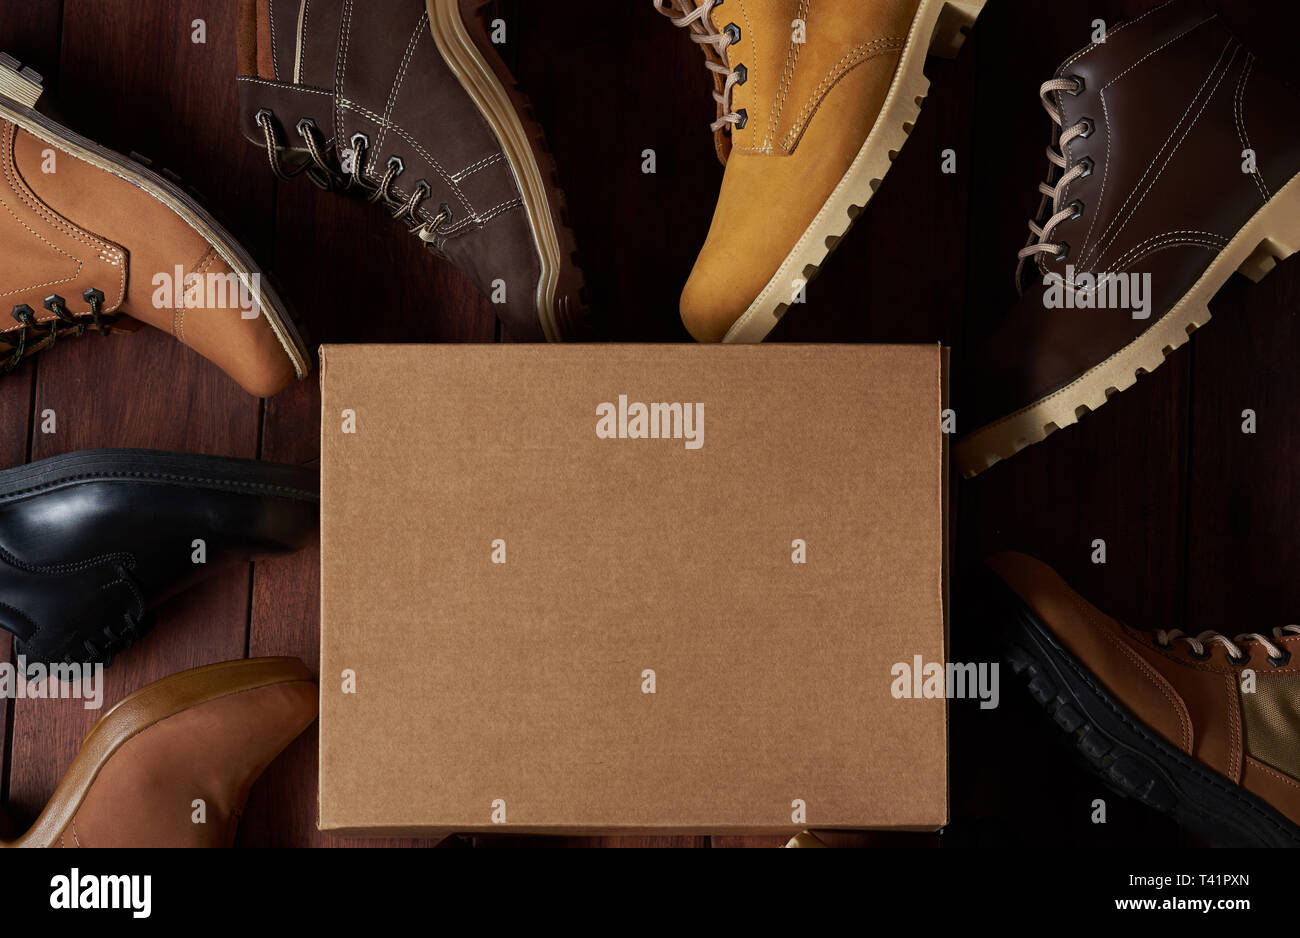 Leather footwear theme. Cartoon box for shoes on wooden background Stock Photo